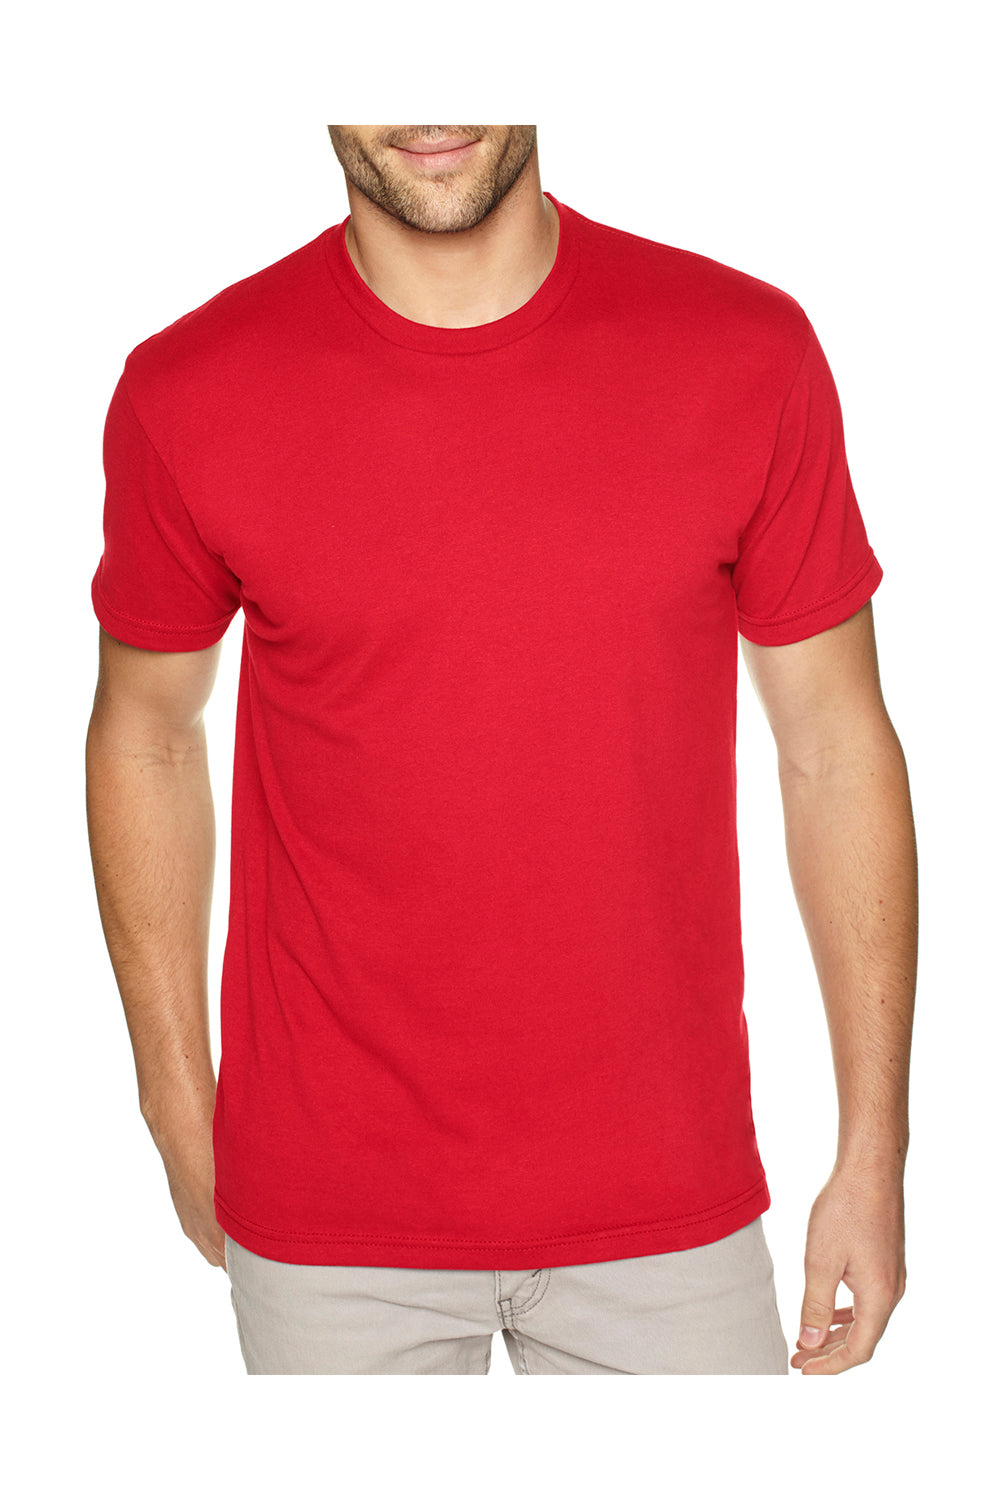 Next Level 6410 Mens Sueded Jersey Short Sleeve Crewneck T-Shirt Red Front